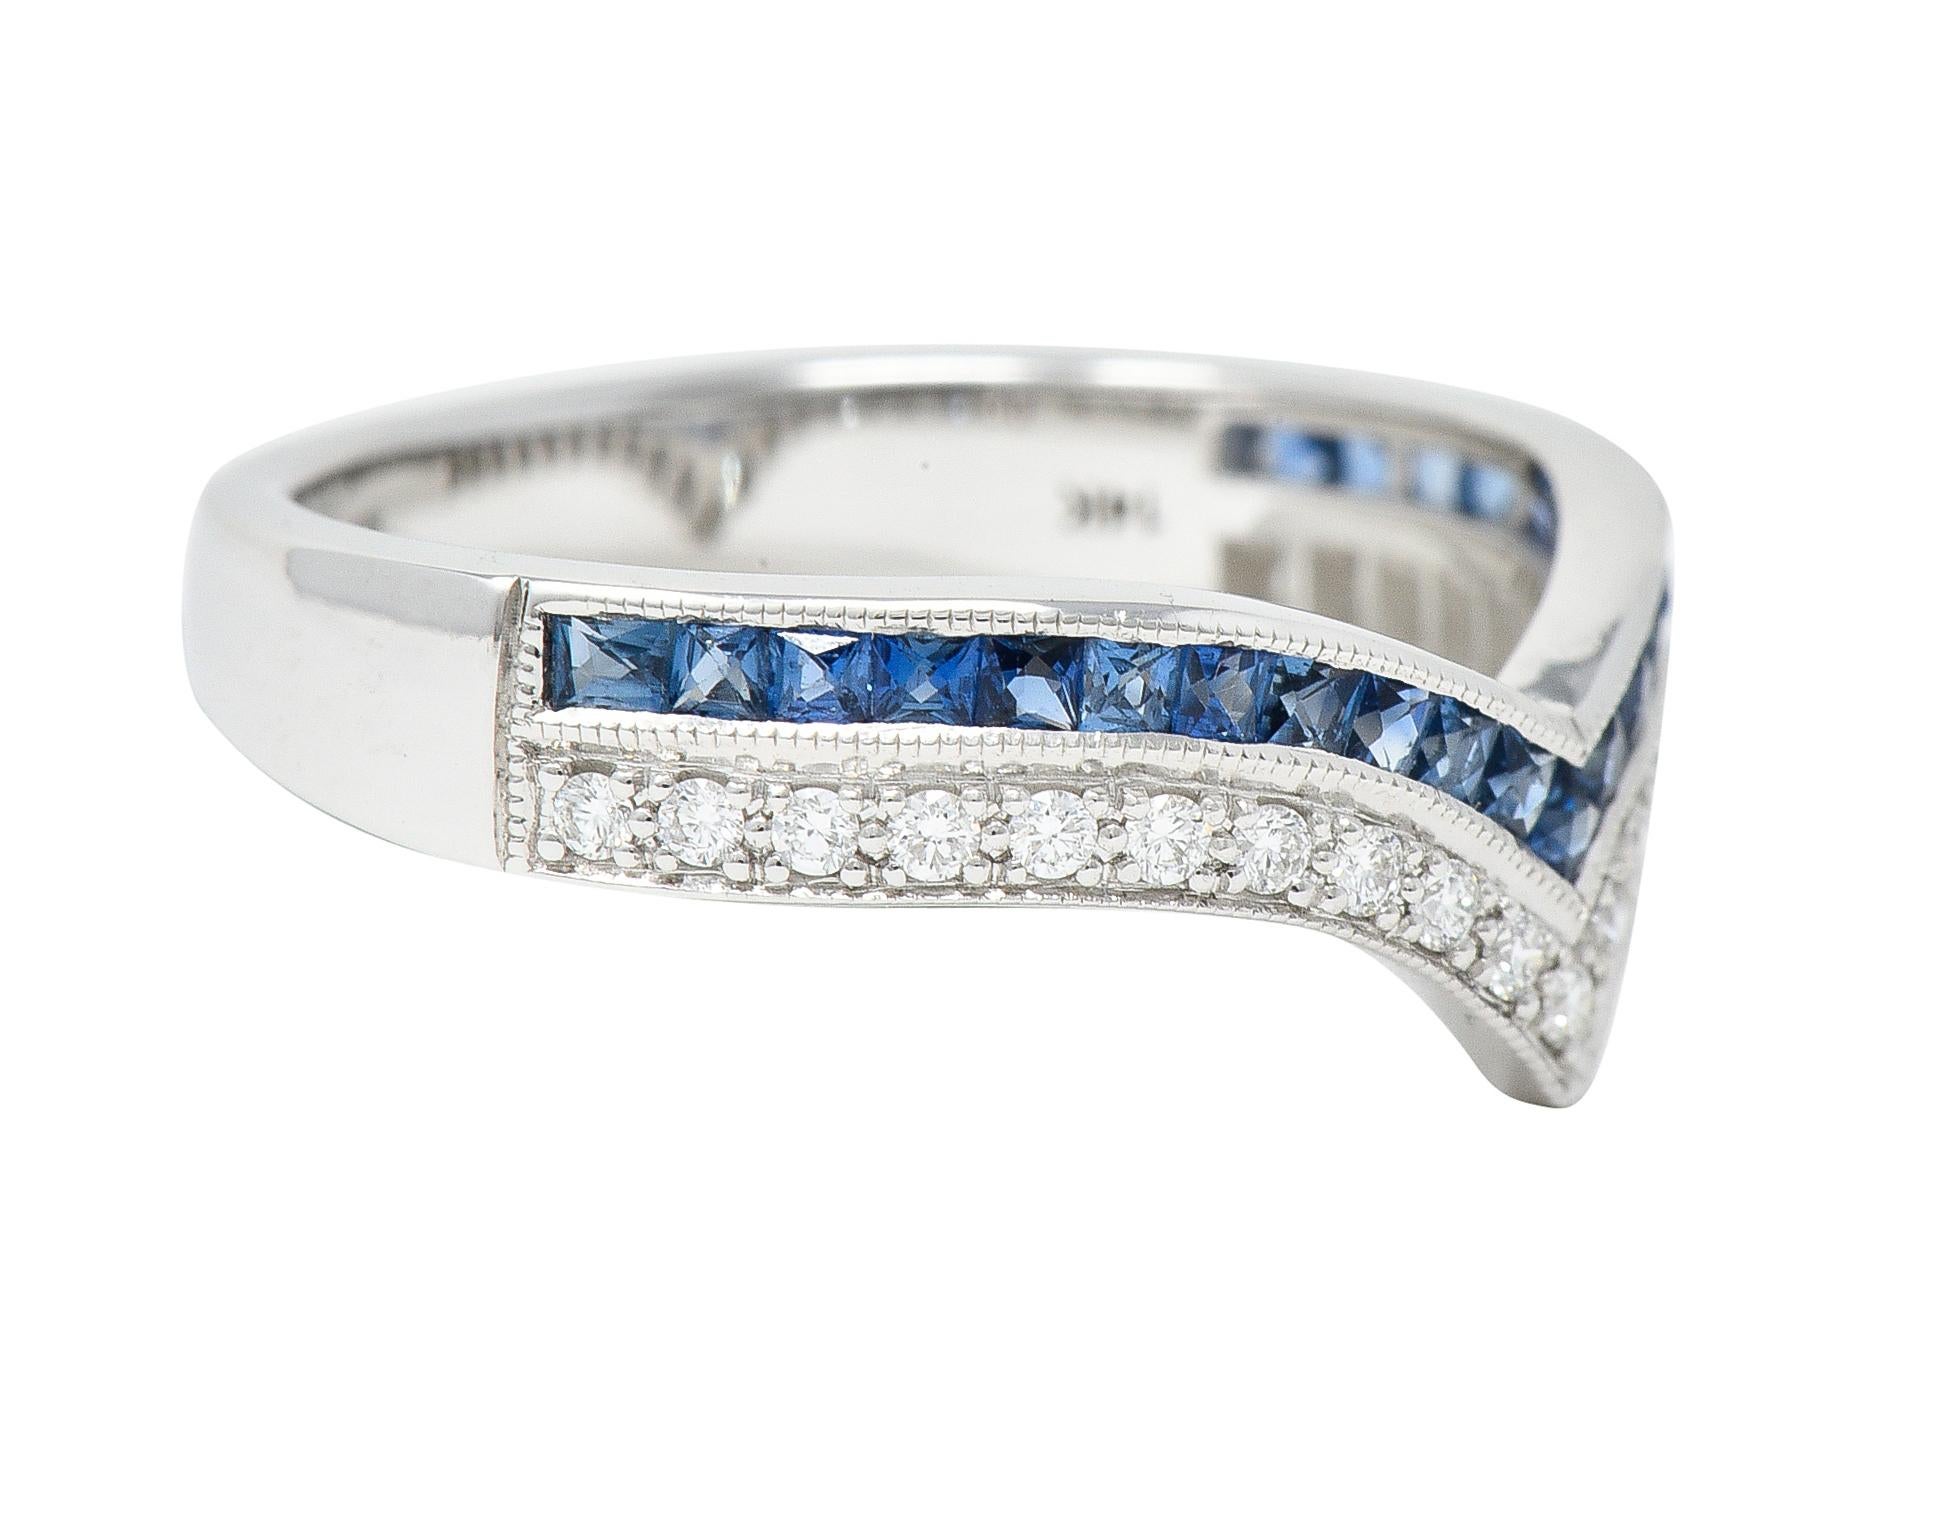 Designed as a pointed chevron motif contour style band featuring one row each of sapphires and diamonds. Sapphires are French cut and weigh approximately 0.53 carats total. Transparent medium blue in color and channel set to front. Diamonds are